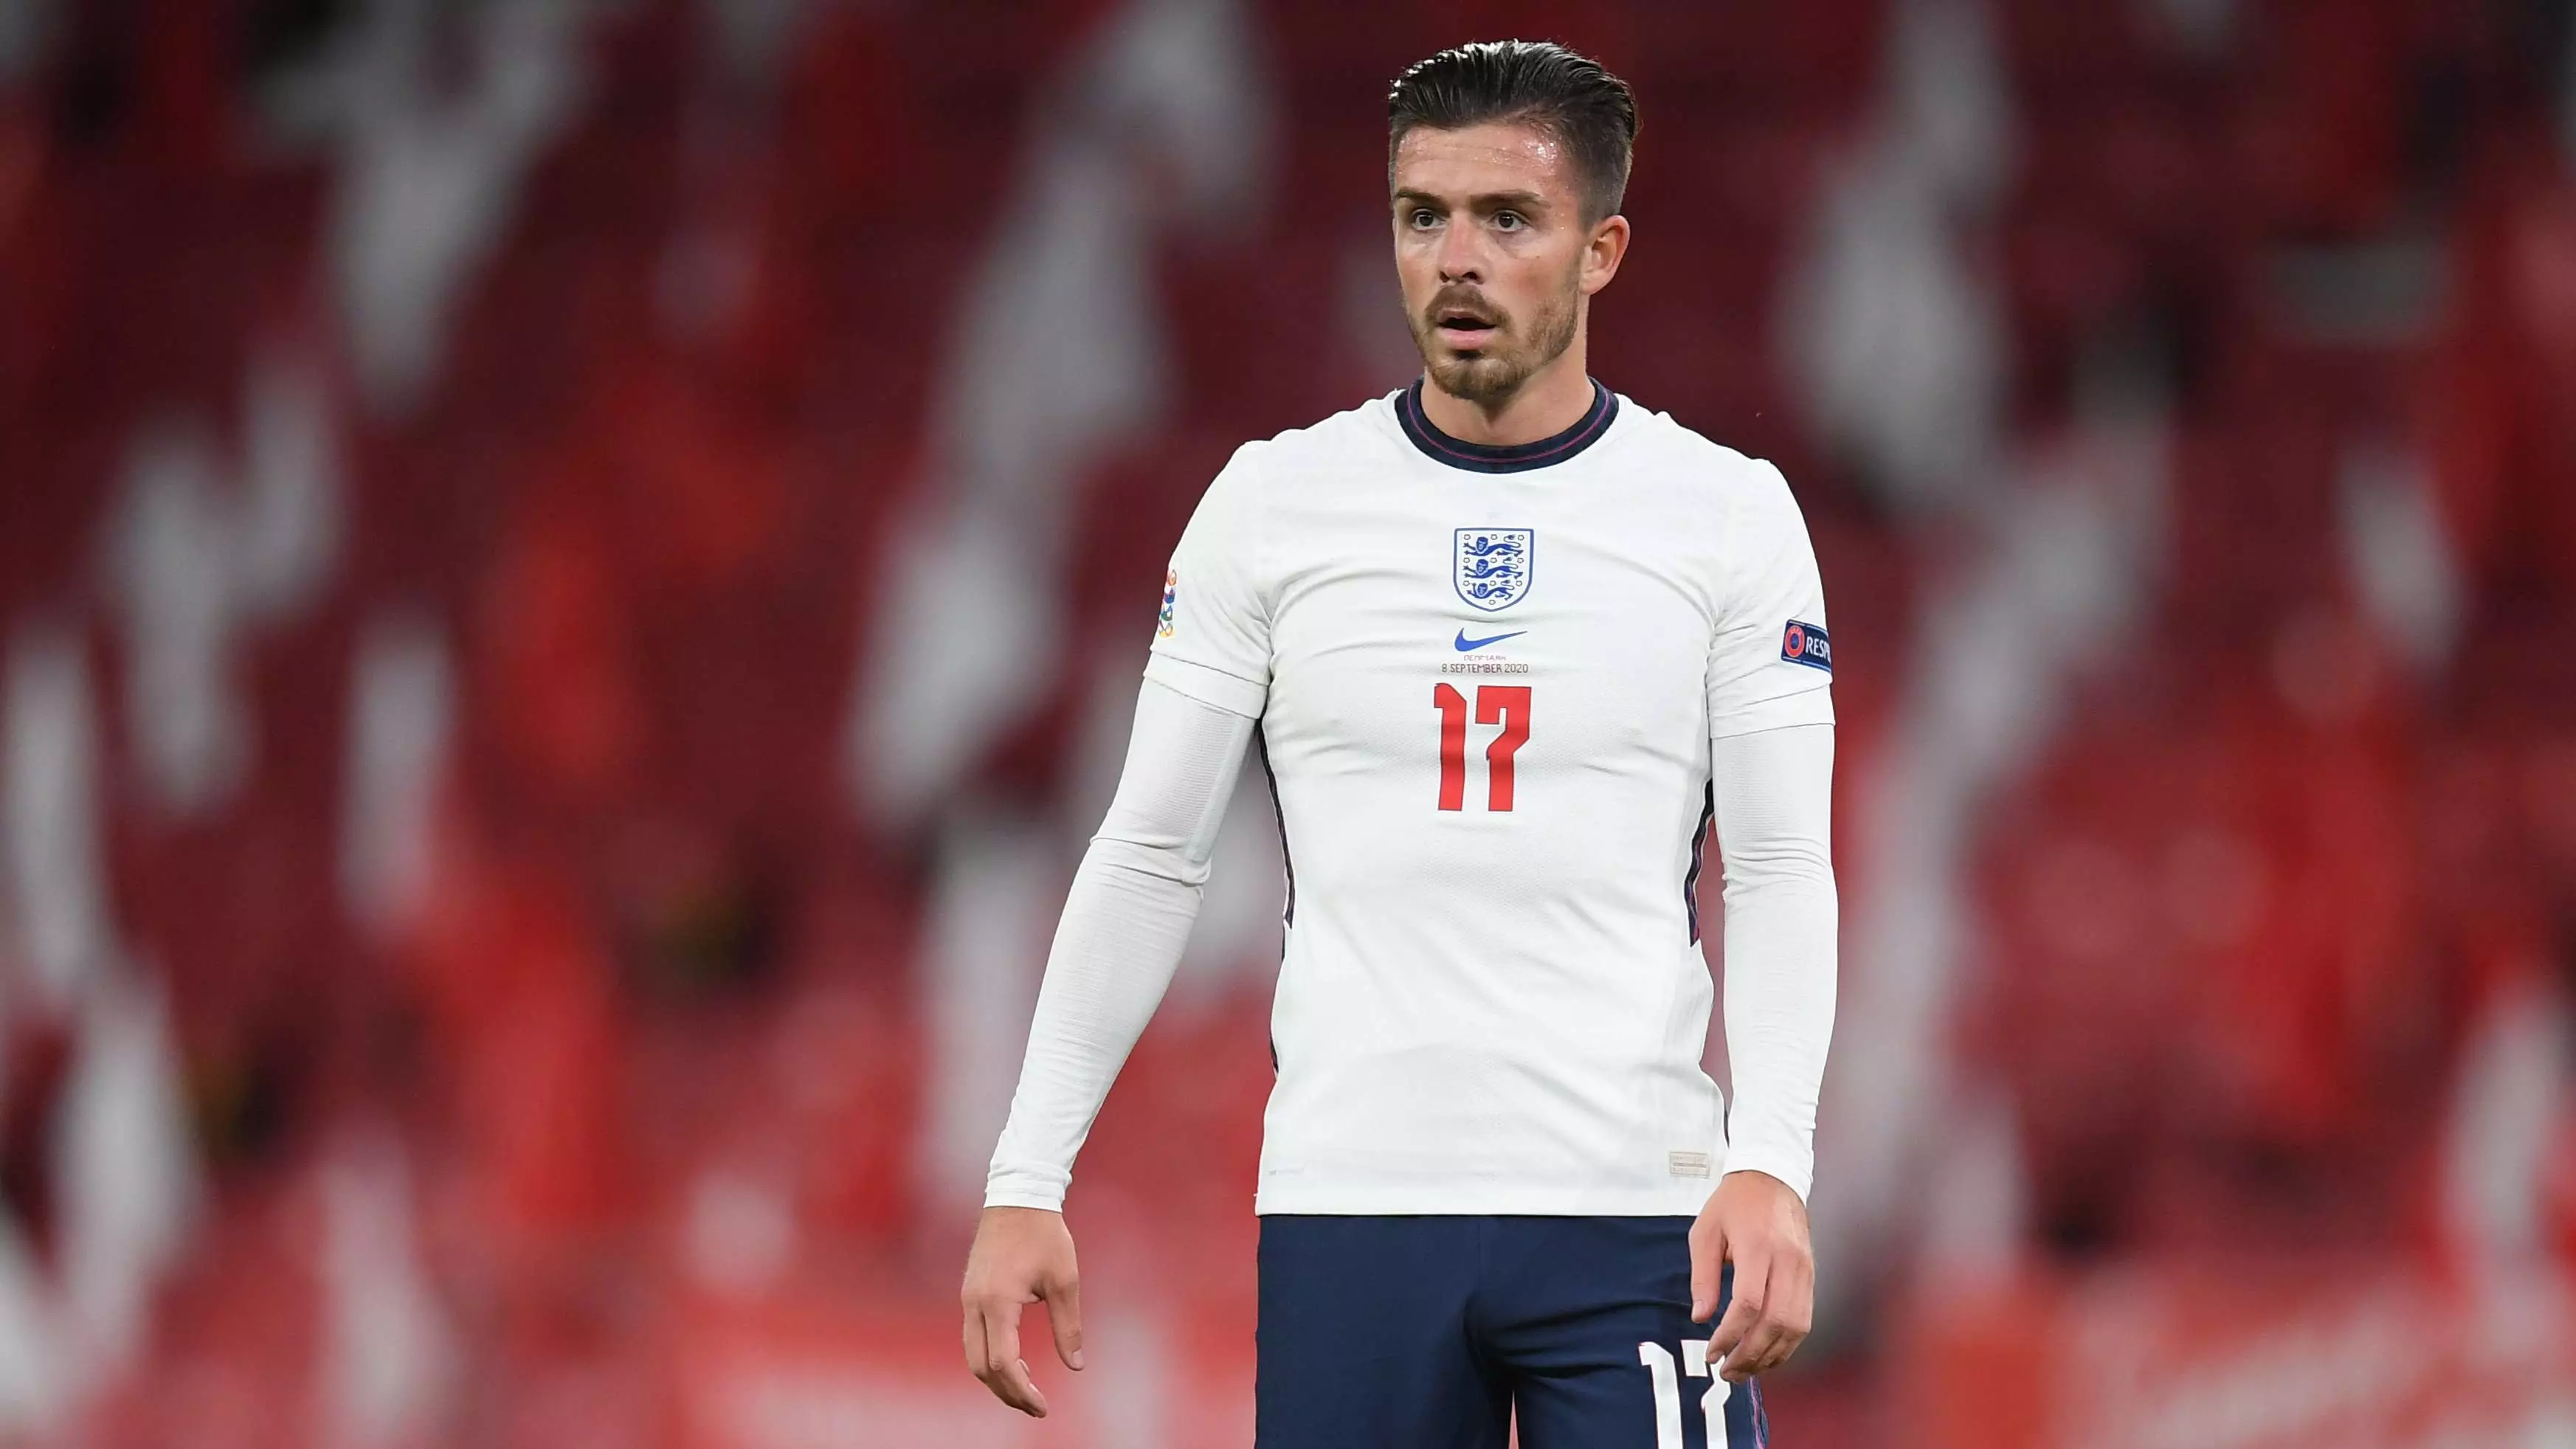 Jack Grealish is likely to start on the bench for England this evening